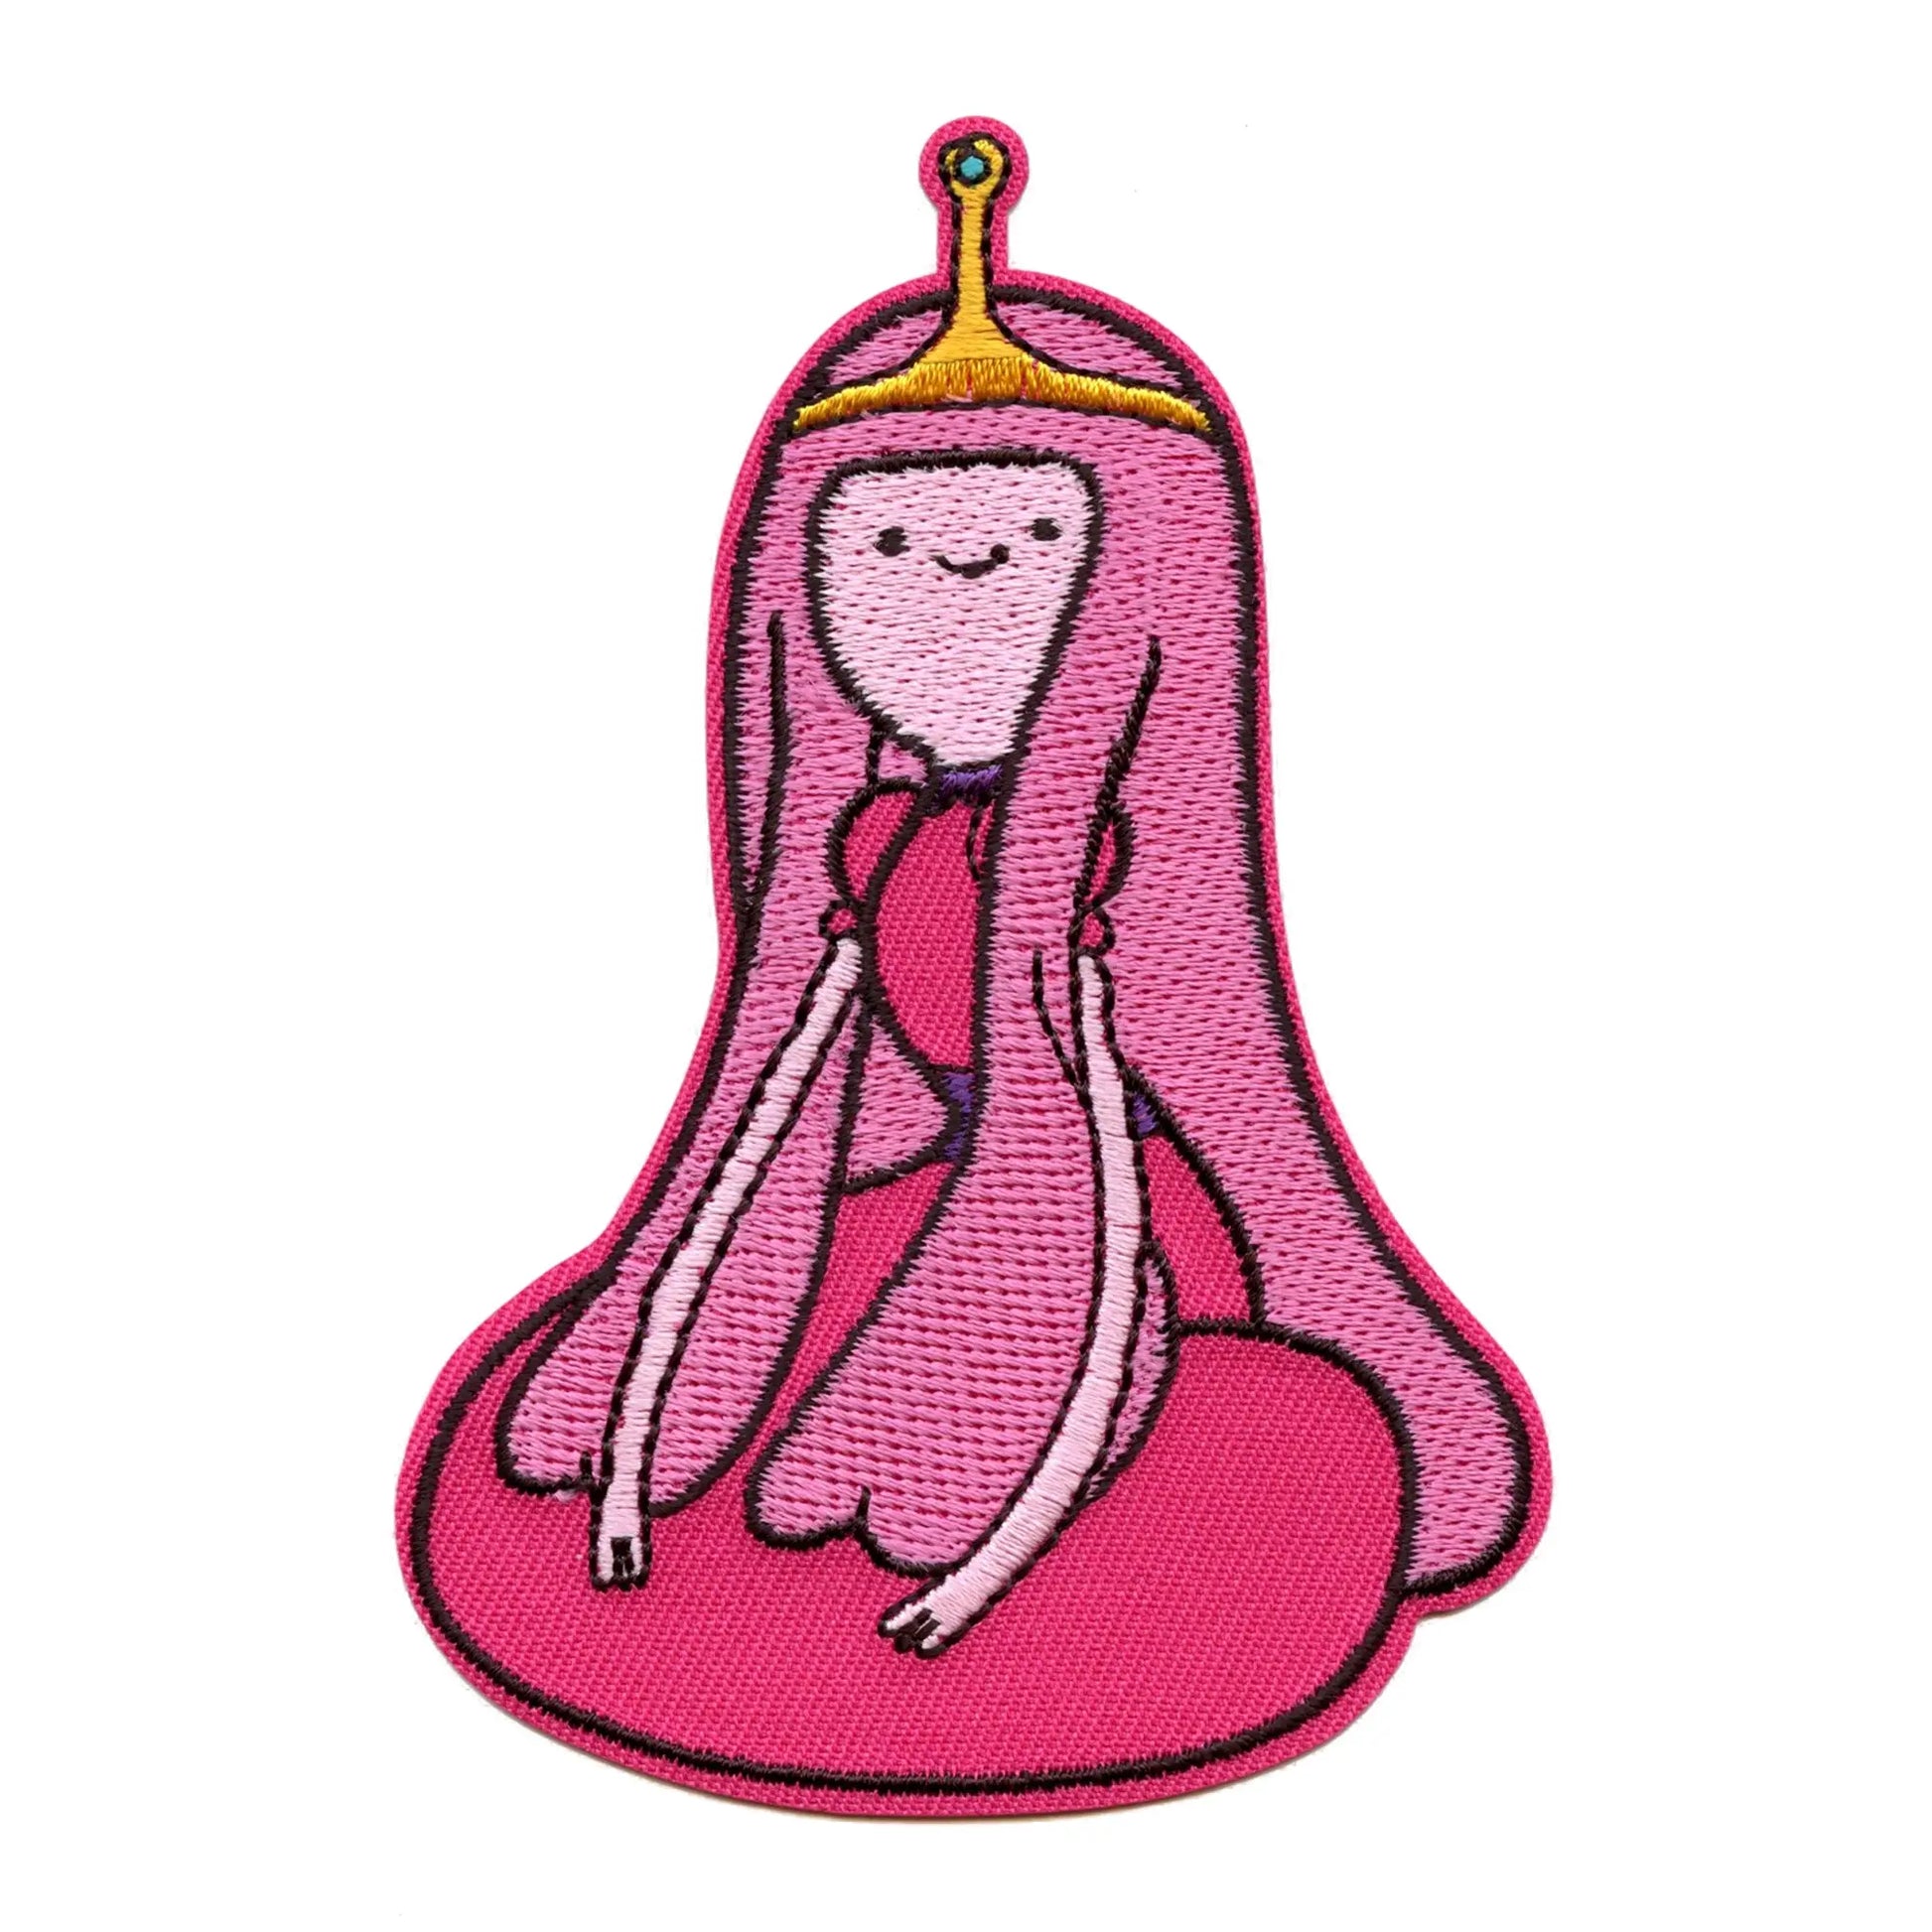 Adventure Time Princess Bubblegum Sitting Patch Cartoon Network Animation Embroidered Iron On